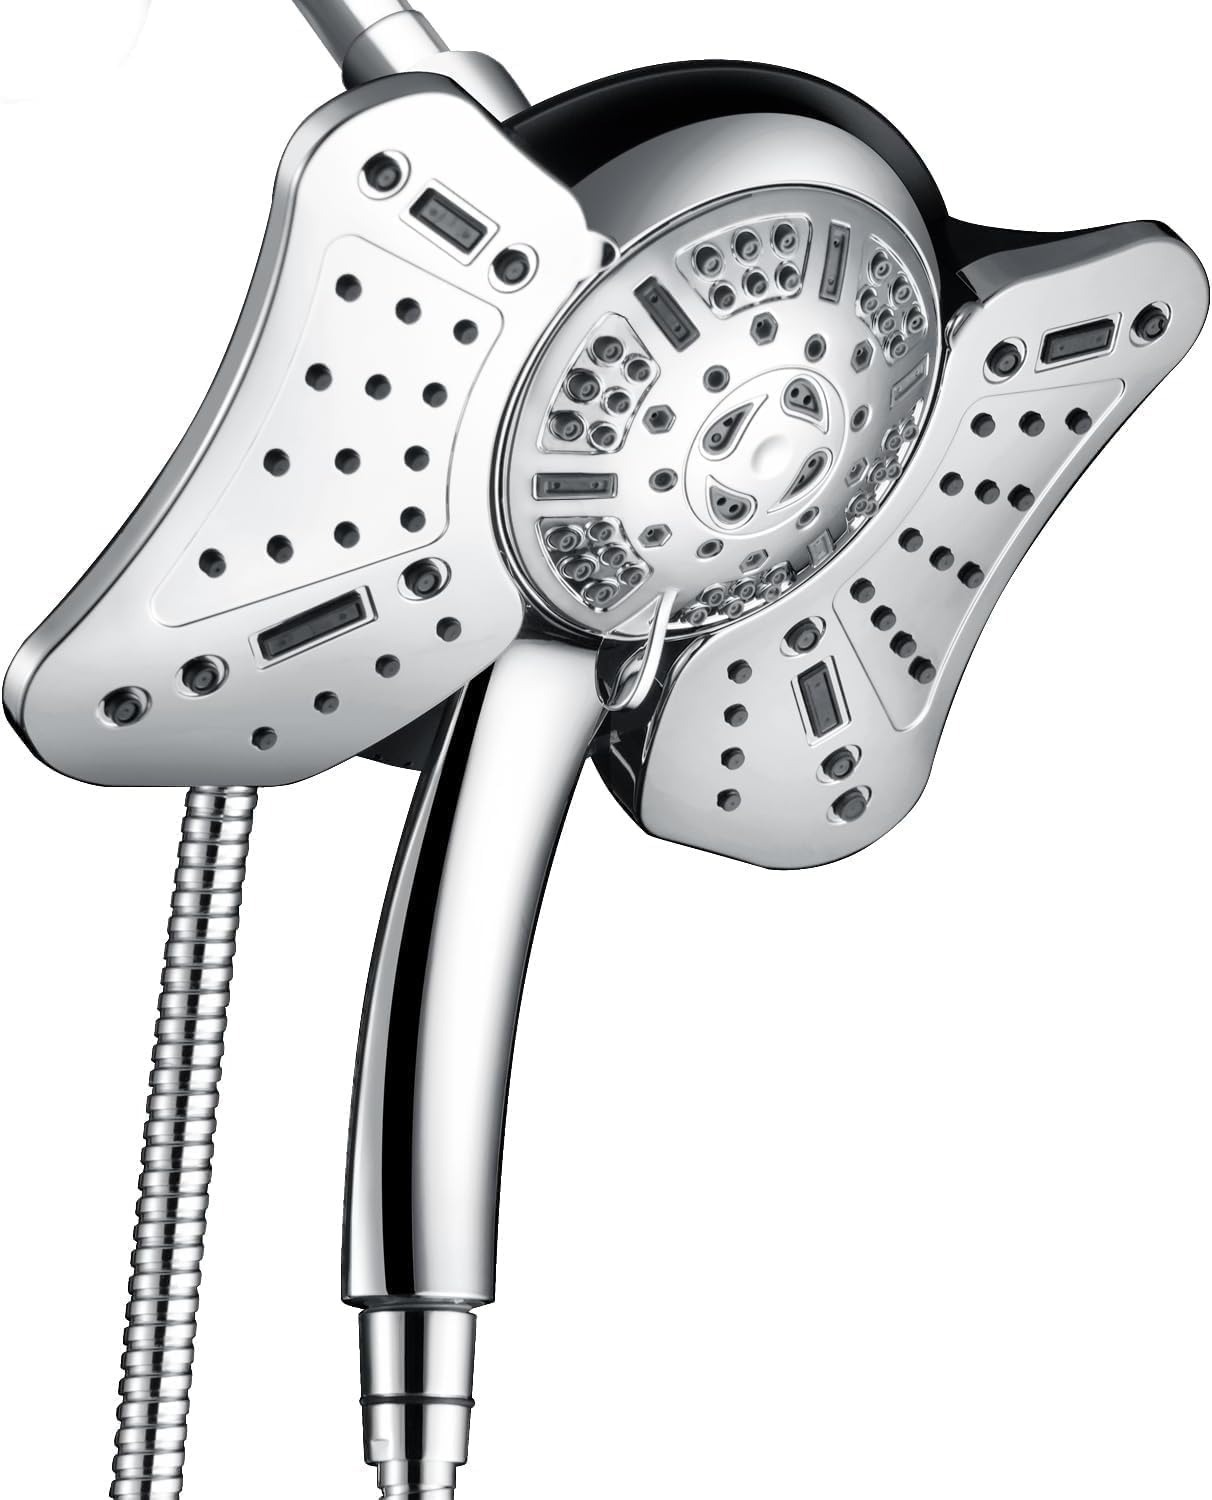 2 in 1 Grich High pressure shower head combo 2.5GPM $29.74 + Free Shipping w/Prime or $35+